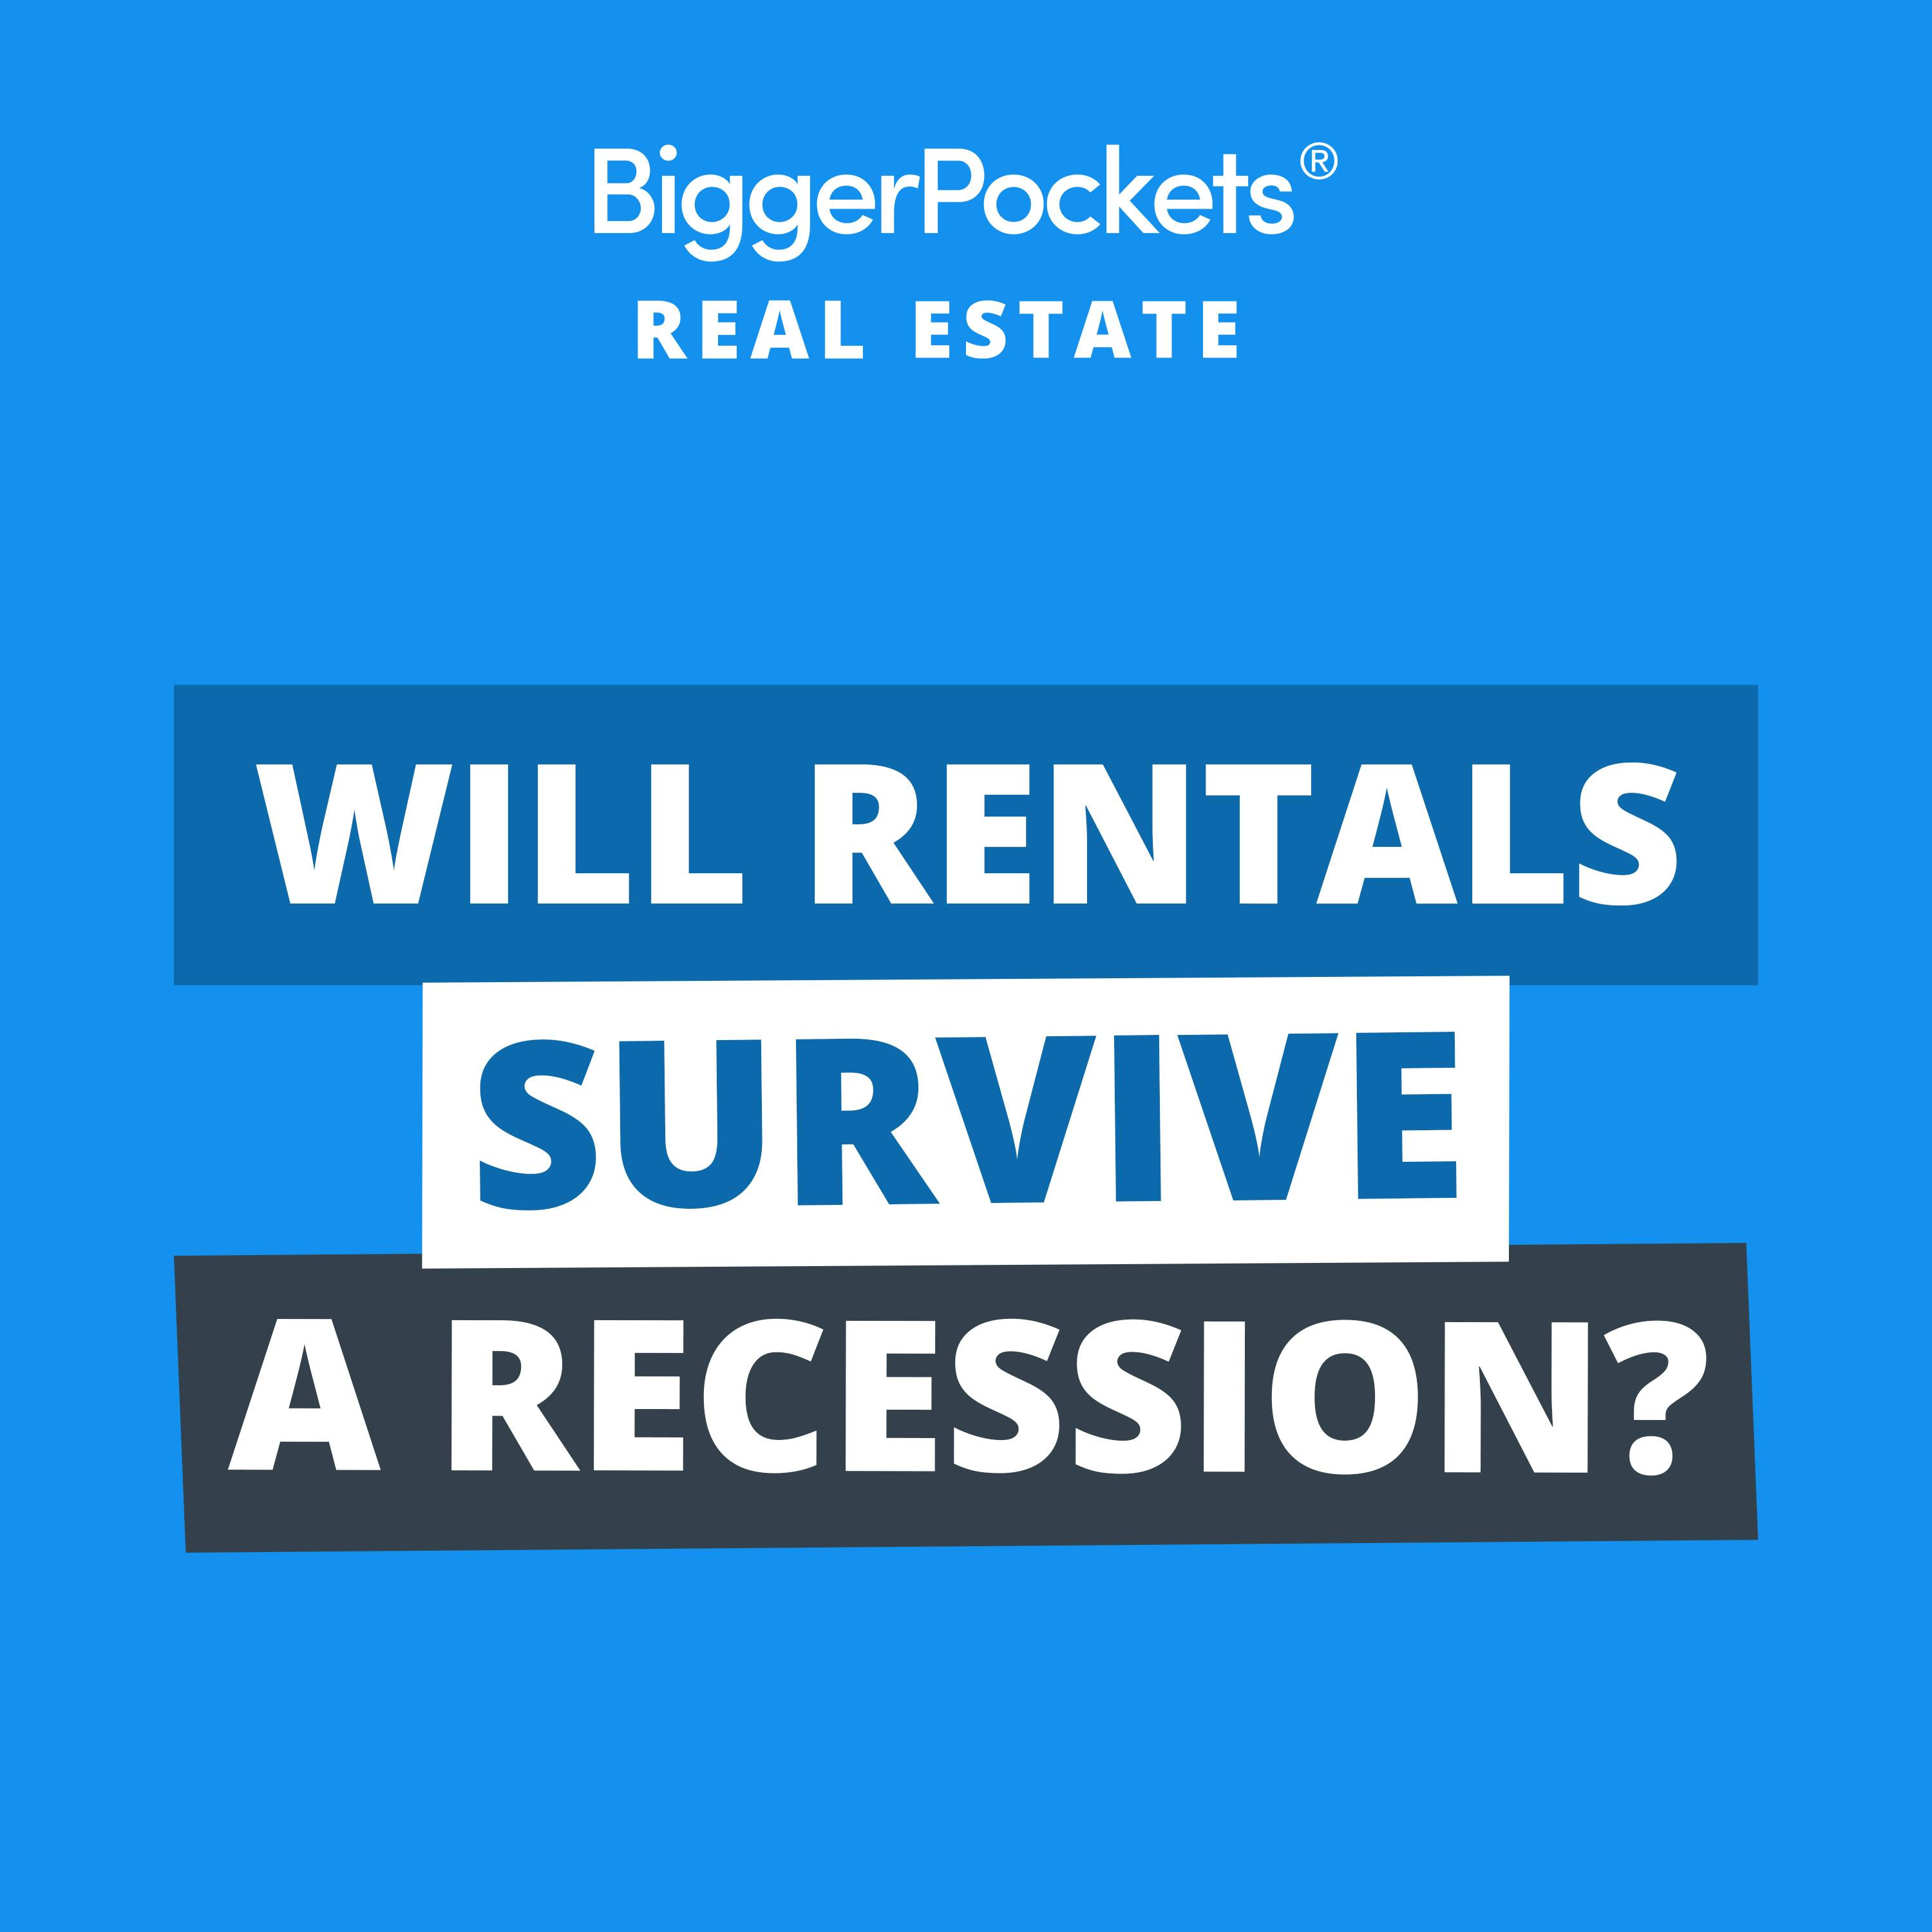 651: Seeing Greene: Recession Risks, Renting to Family, & Scaling Your Portfolio